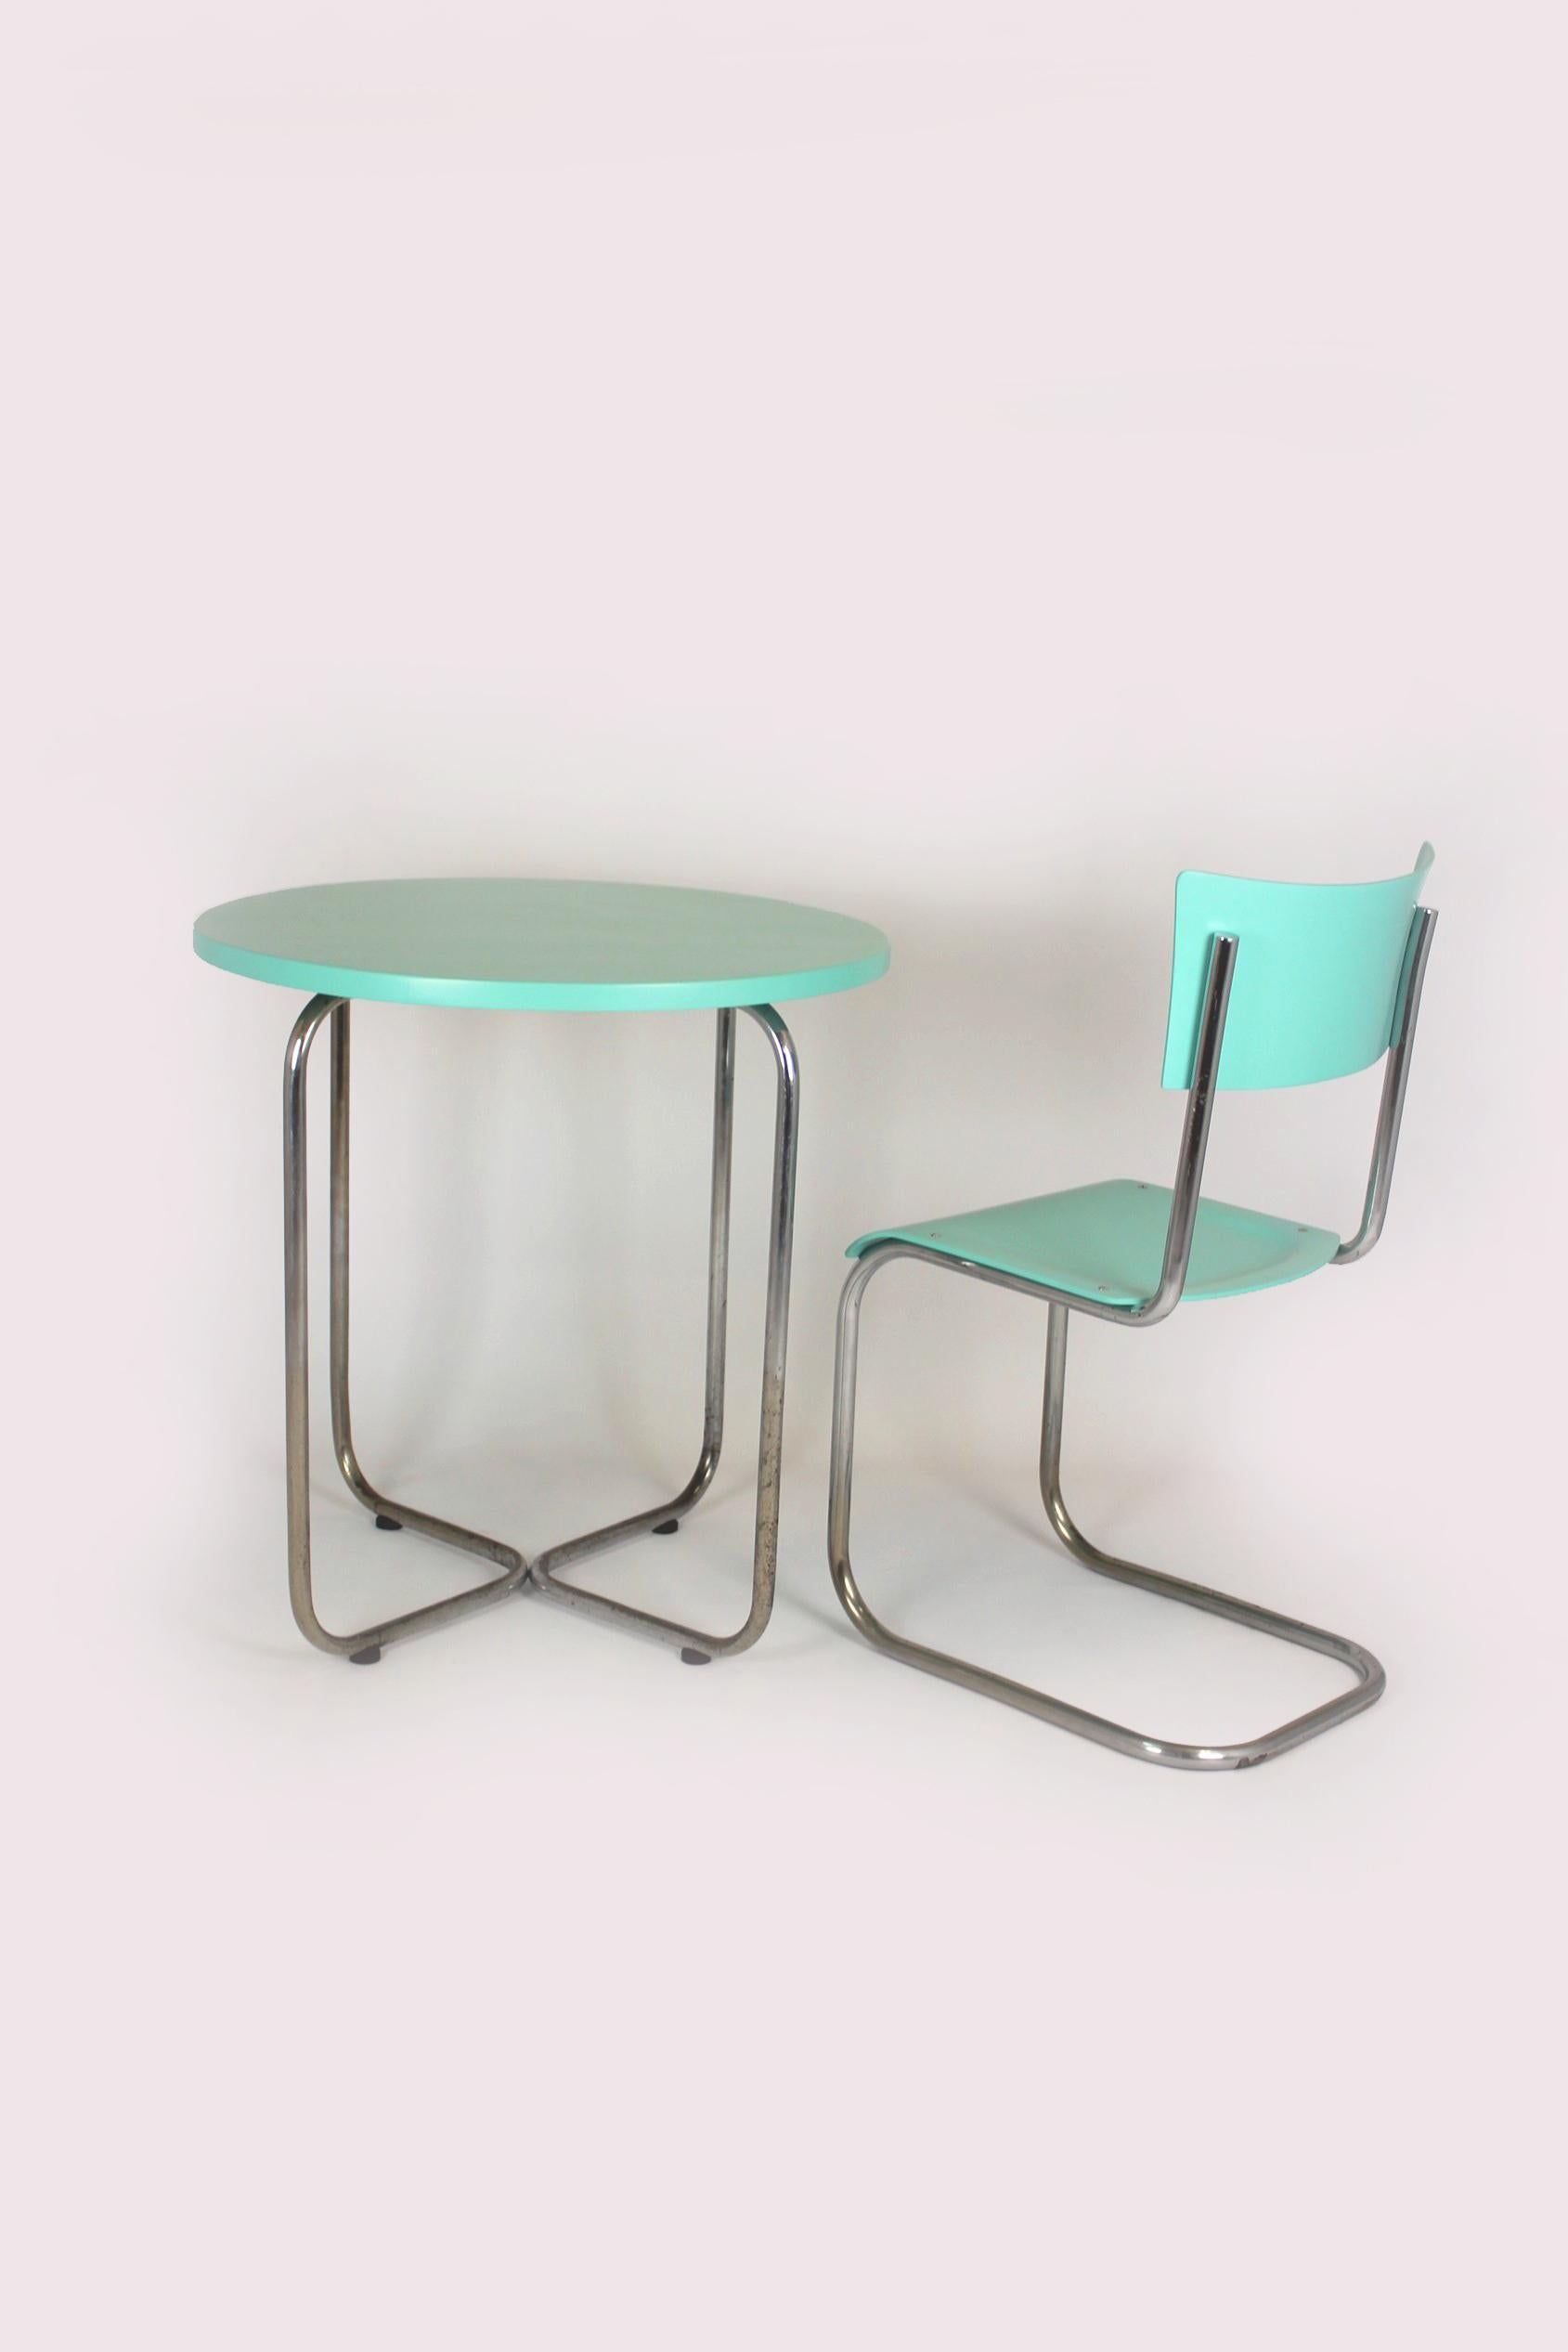 Bauhaus Tubular Steel Set, Round Table and Chair by Mart Stam, 1930s For Sale 10